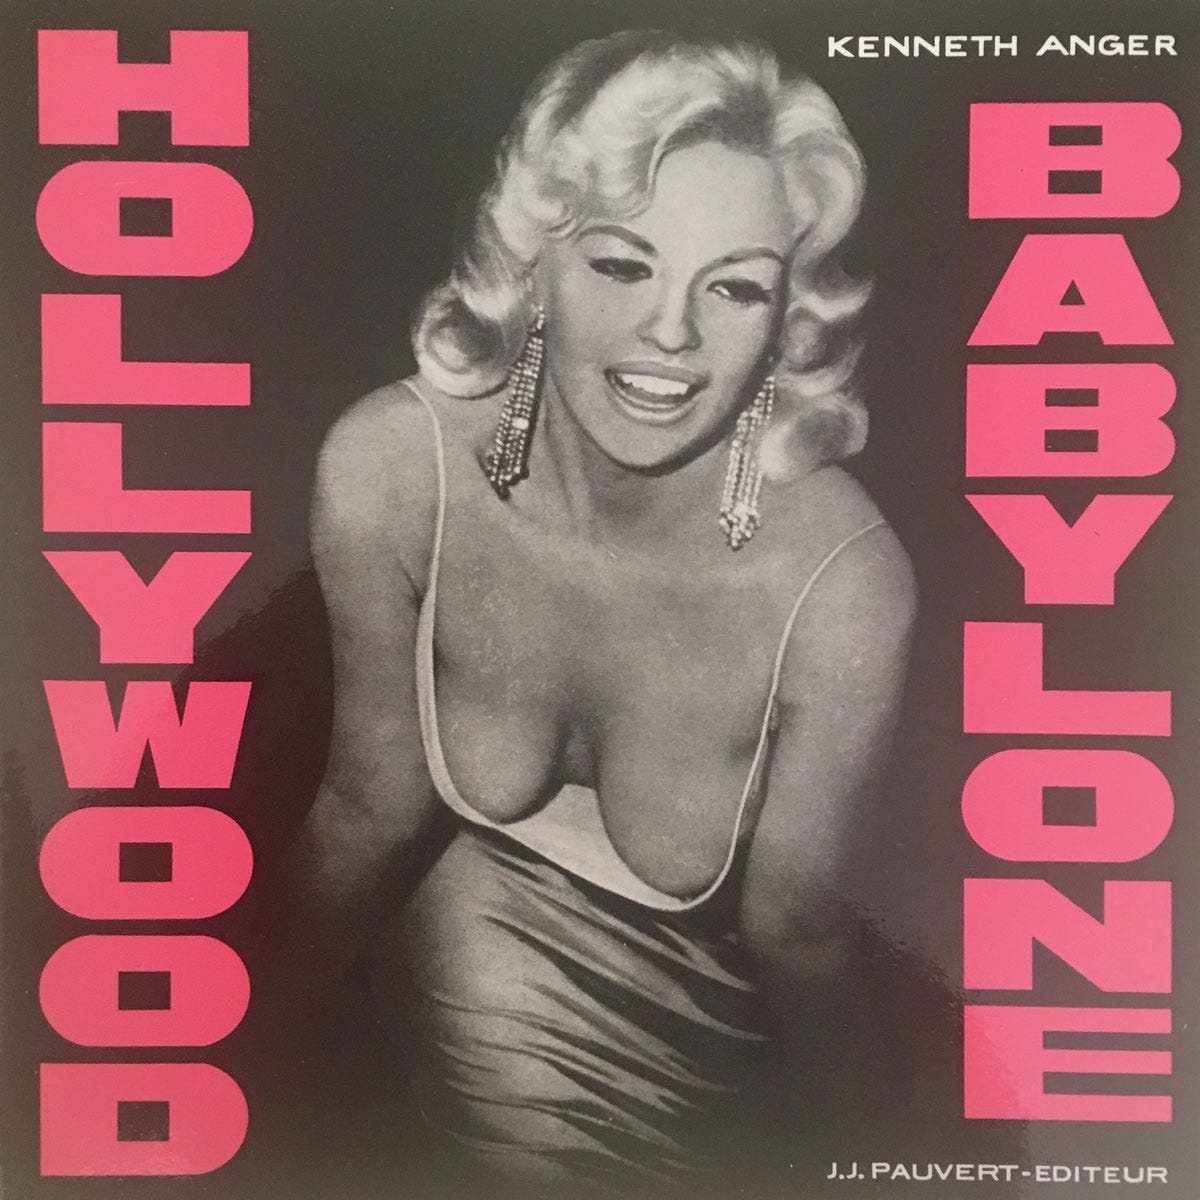 Front cover from the first French edition of Kenneth Anger's 1965 book Hollywood Babylone. The book's title in pink boldface lettering over a black and white photograph of Jayne Mansfield in a low-cut dress